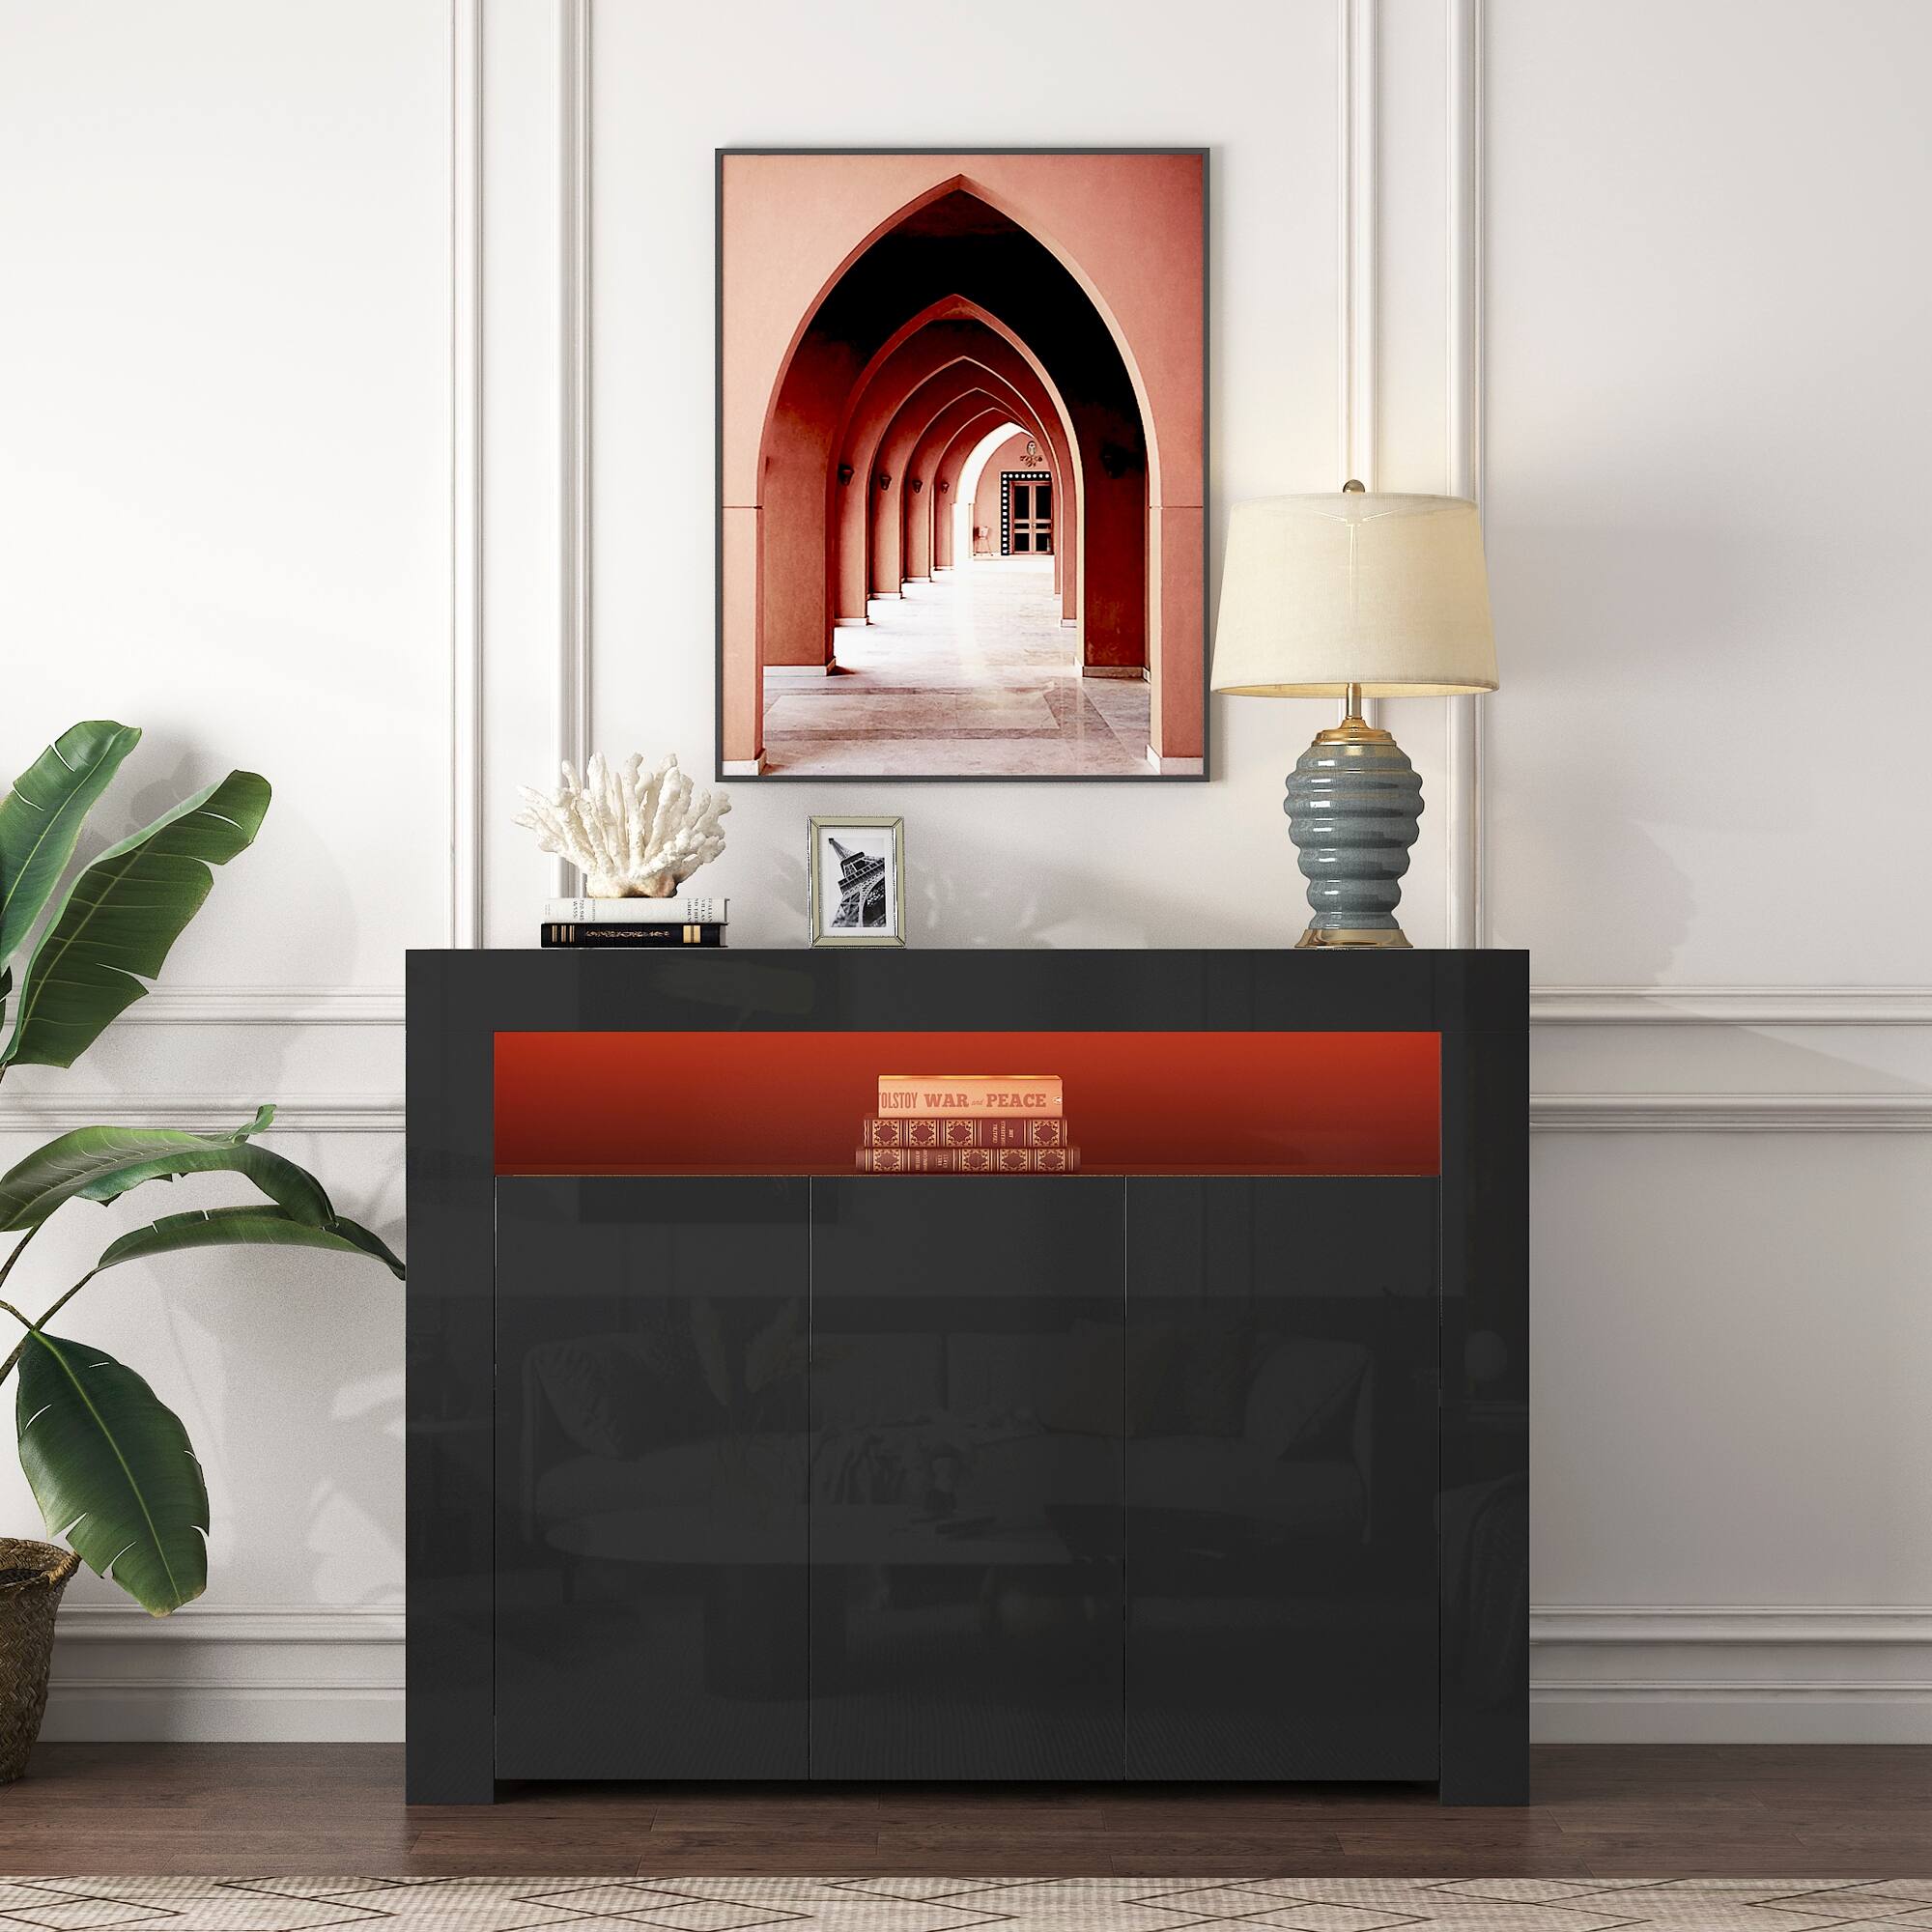 Living Room Sideboard Storage Cabinet Black High Gloss with LED Light